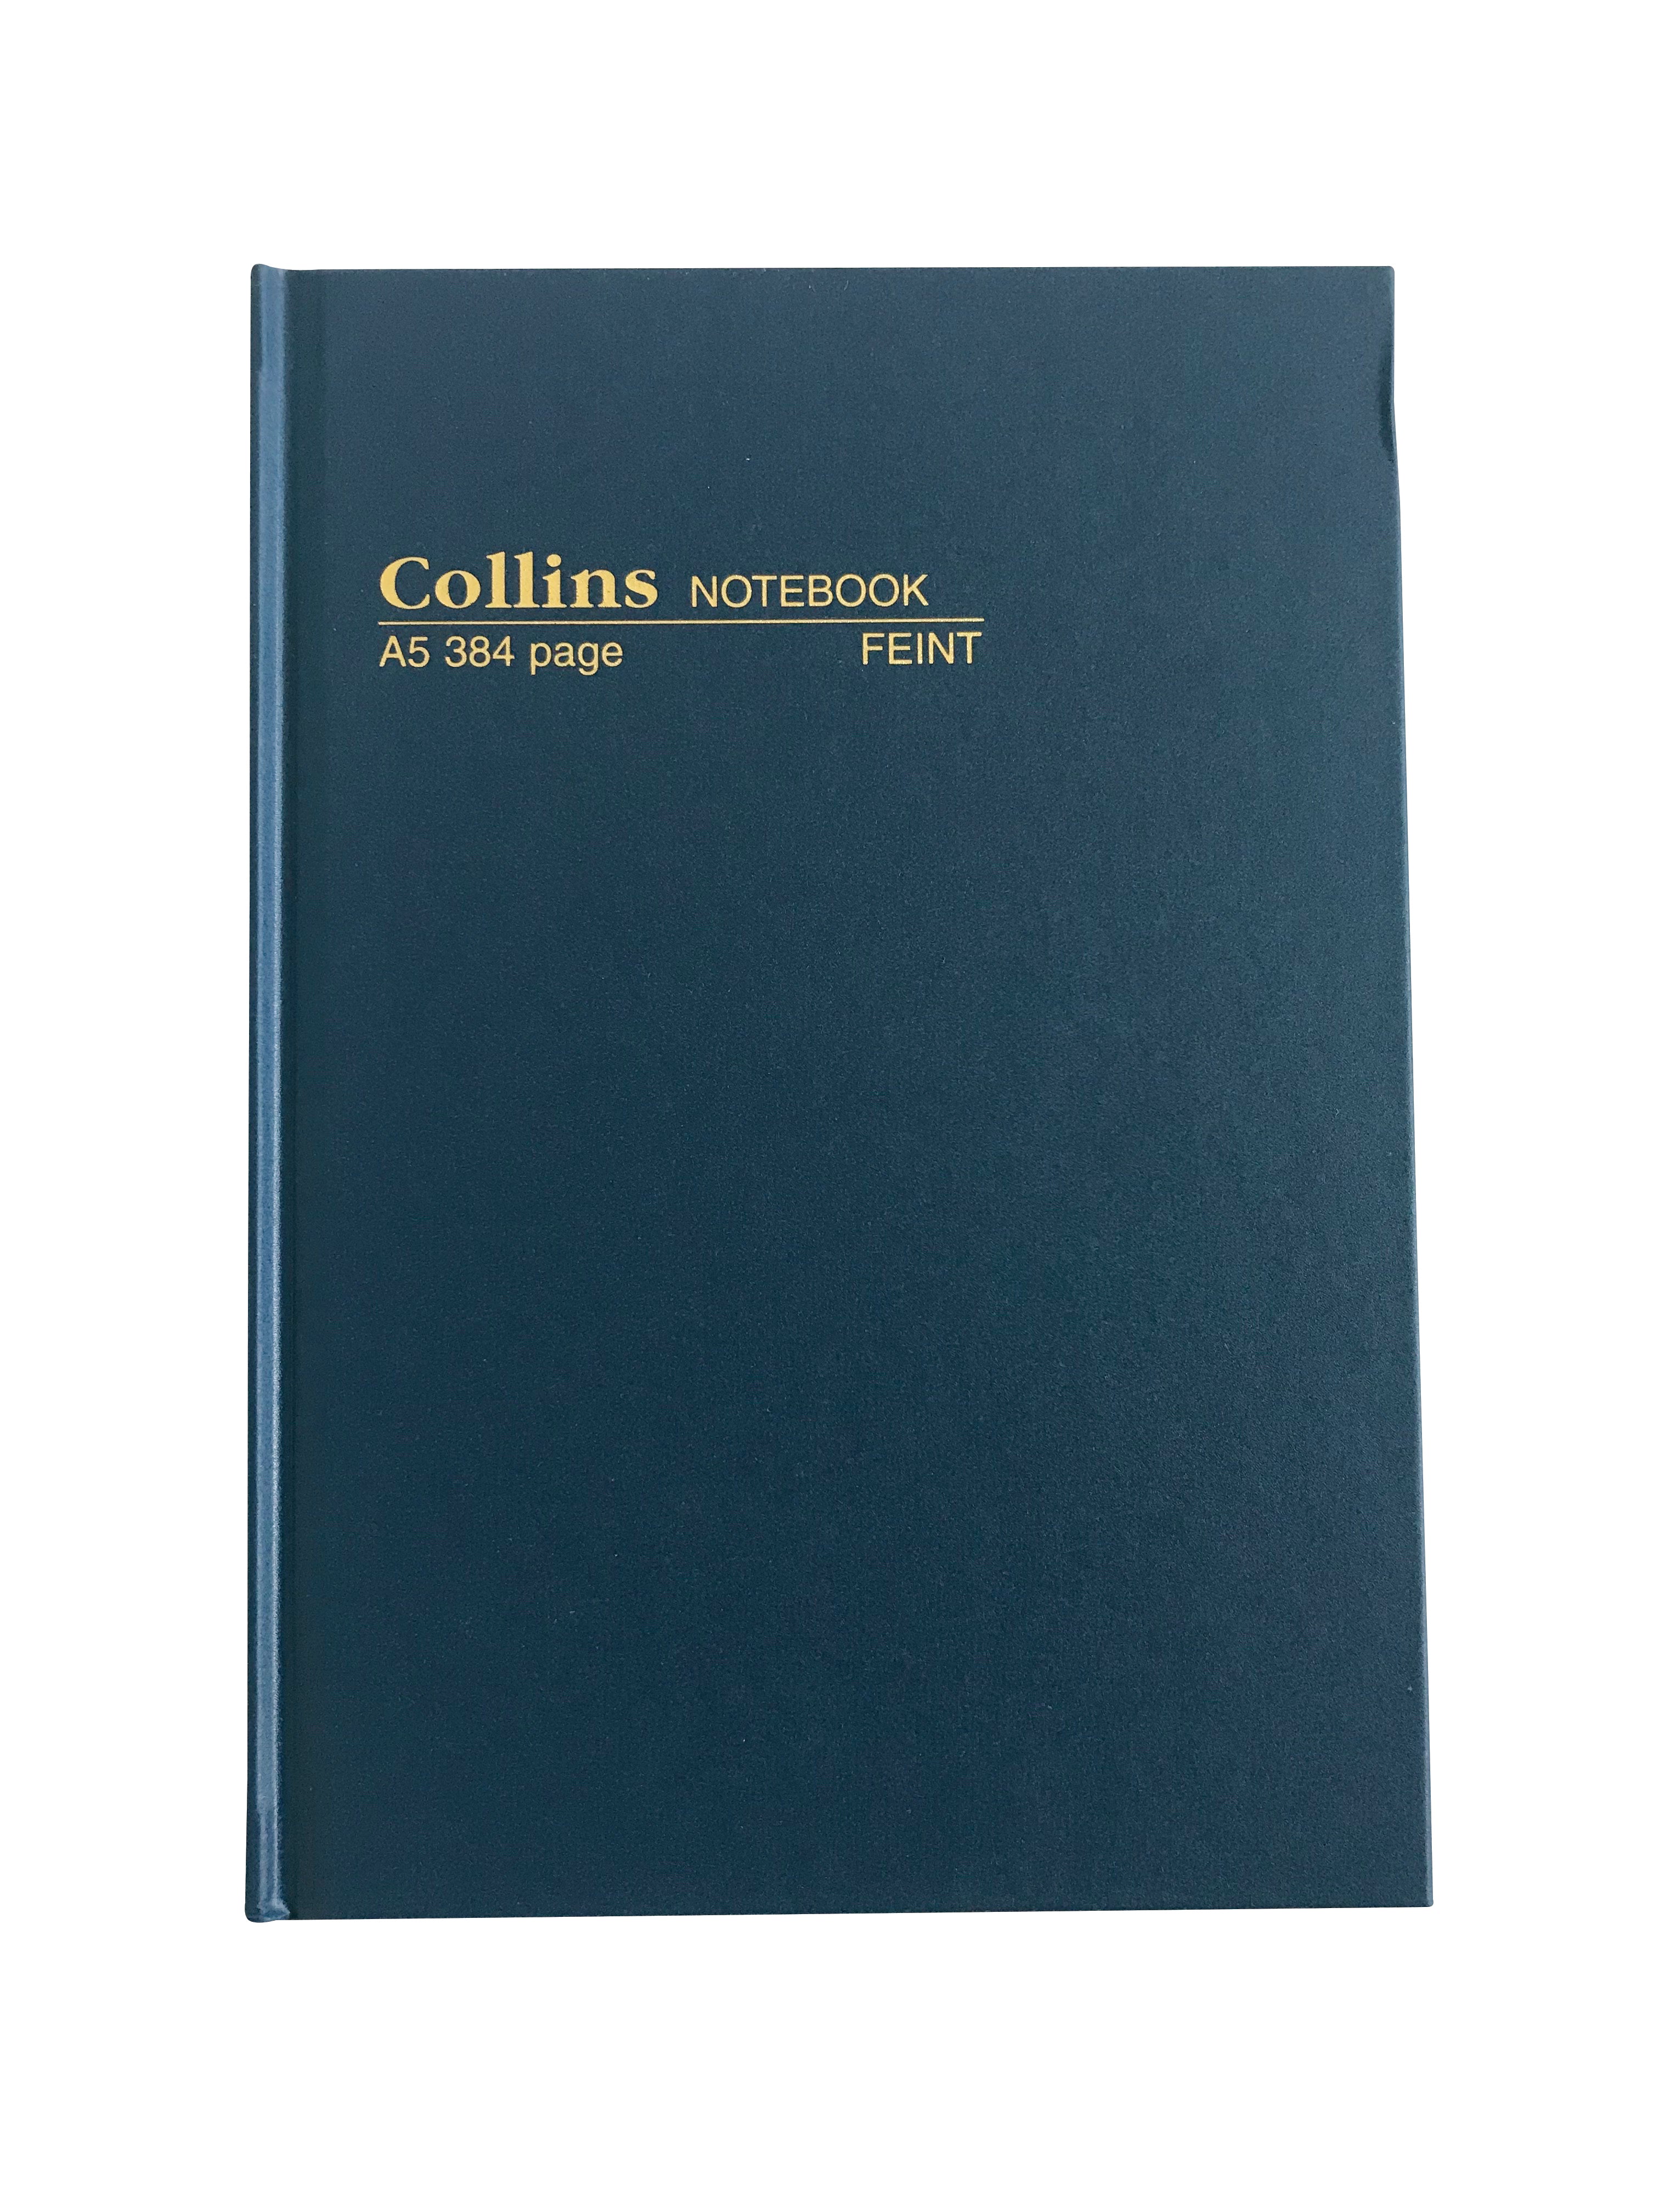 Collins Case and Sewn Feint Notebook - 384 Pages, Size A5